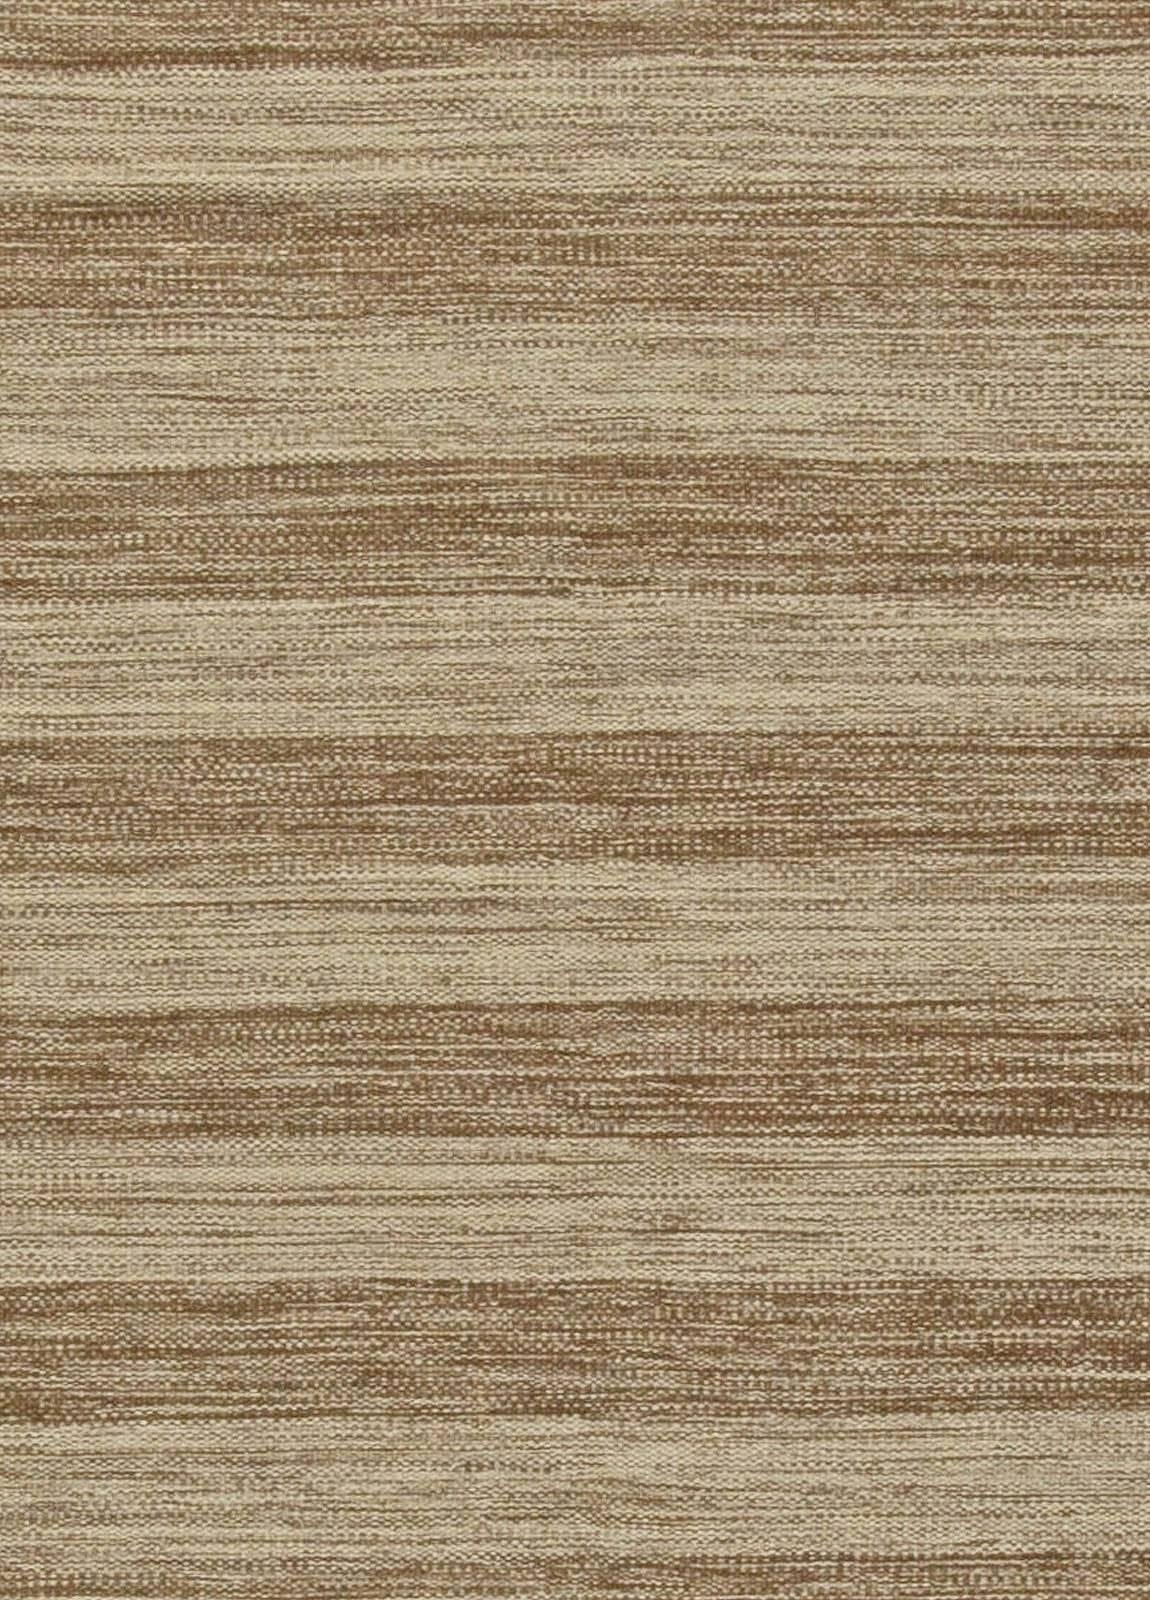 Contemporary striped brown and beige flat-weave wool rug by Doris Leslie Blau
Size: 12.0